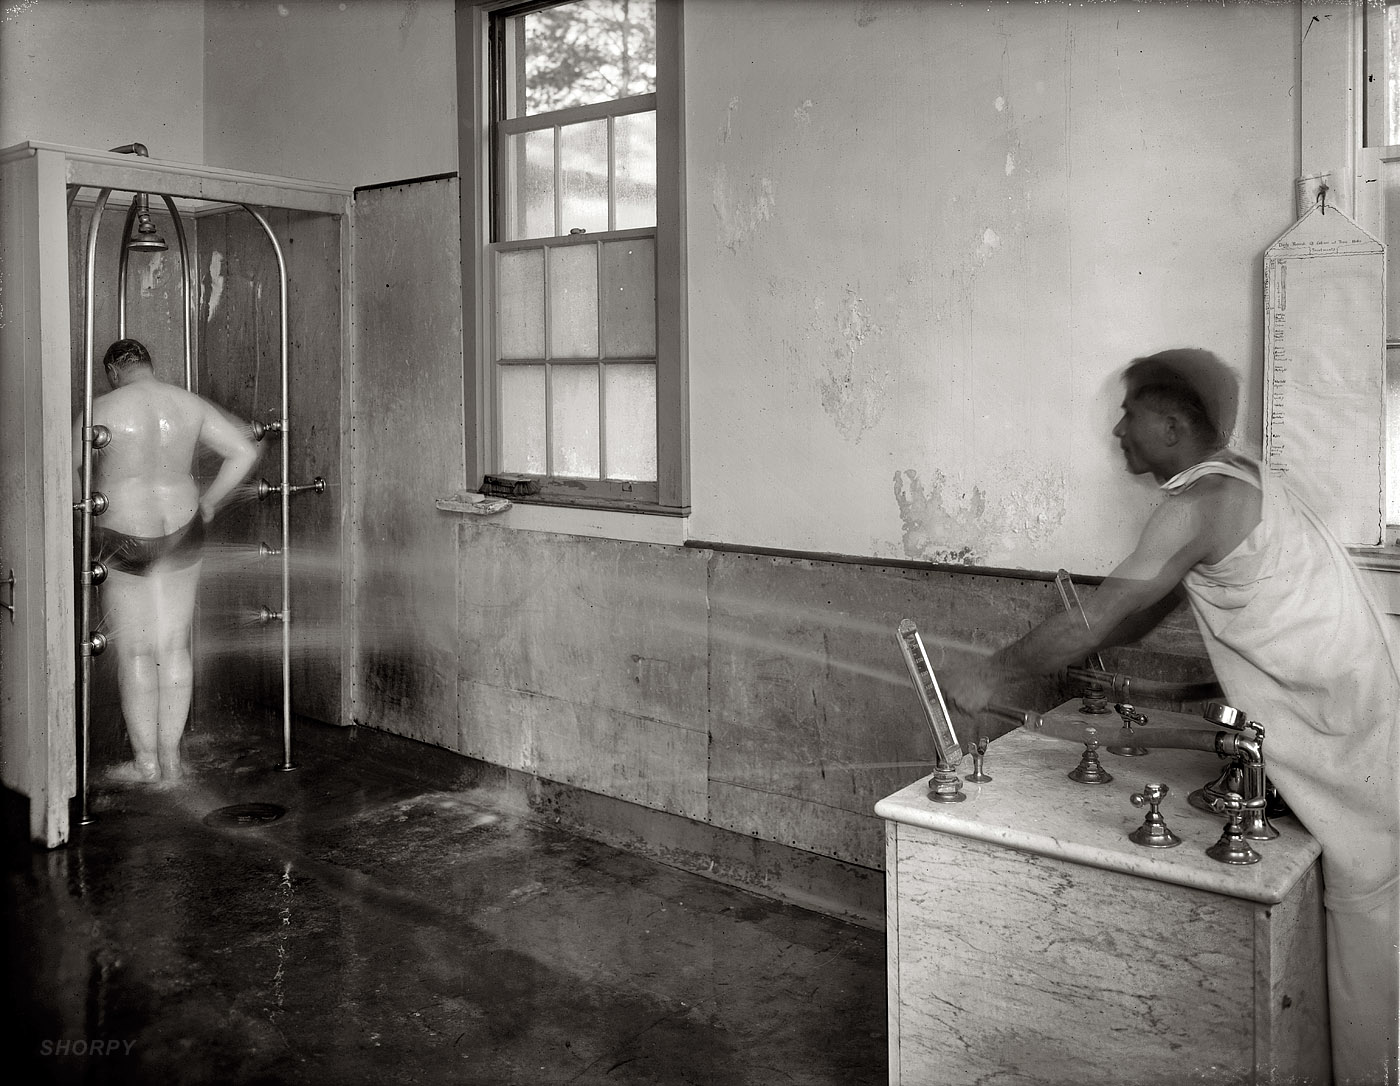 "Walter Reed physiotherapy story." Hydrotherapy in 1920 or 1921 at Walter Reed Hospital. View full size. National Photo Company glass negative.